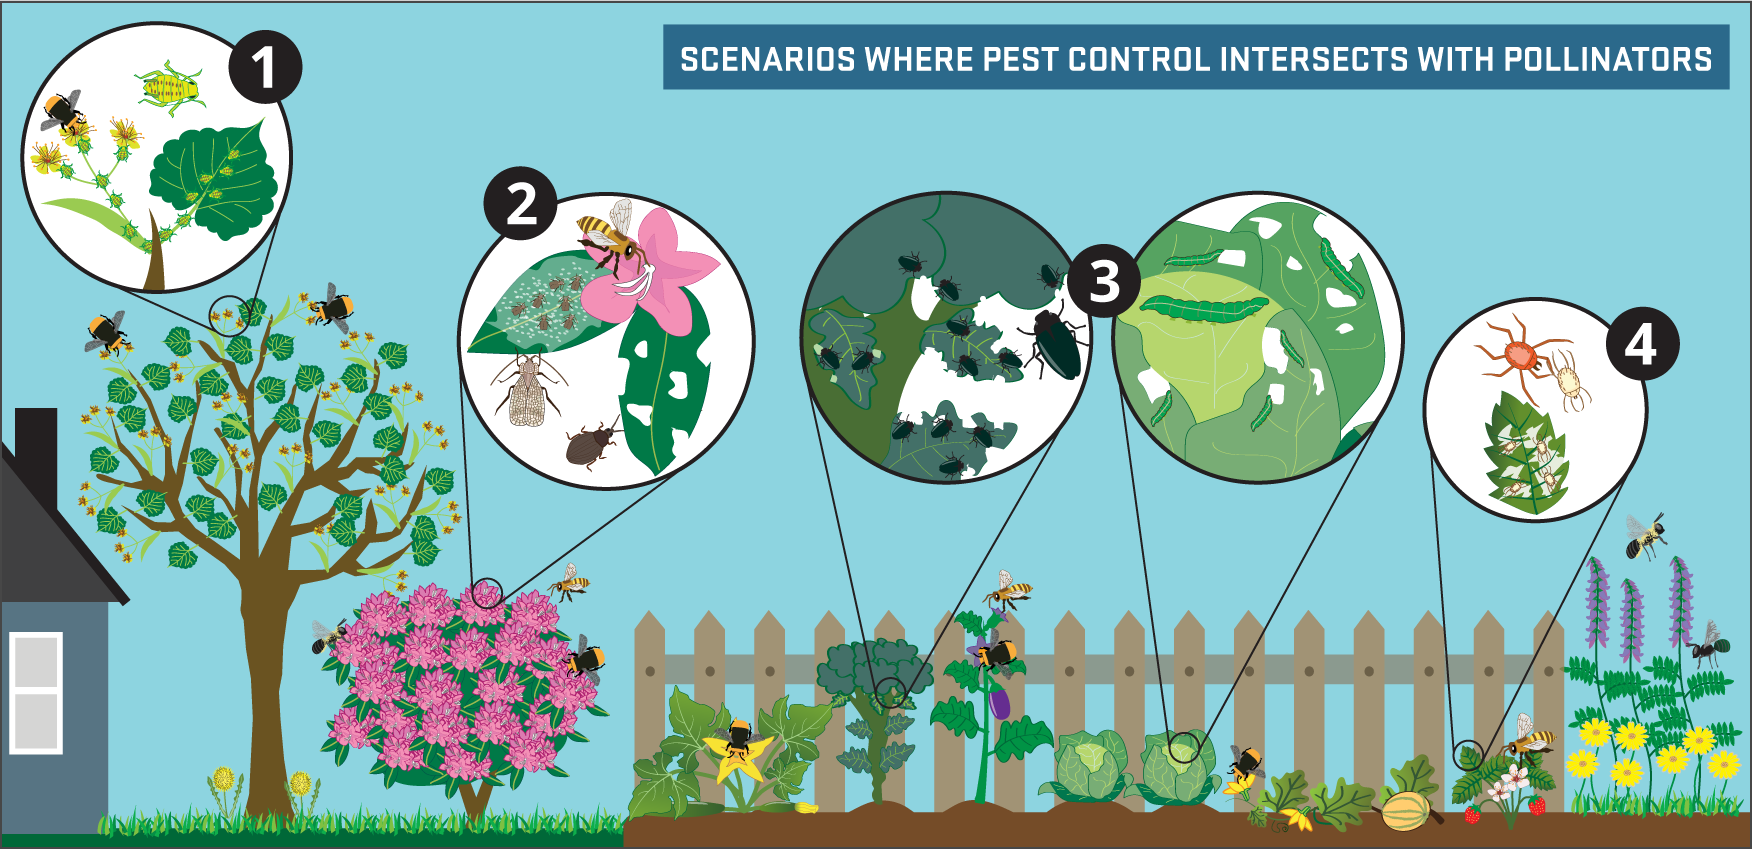 Infographic showing scenarios where pest control intersects with pollinators (full text below)